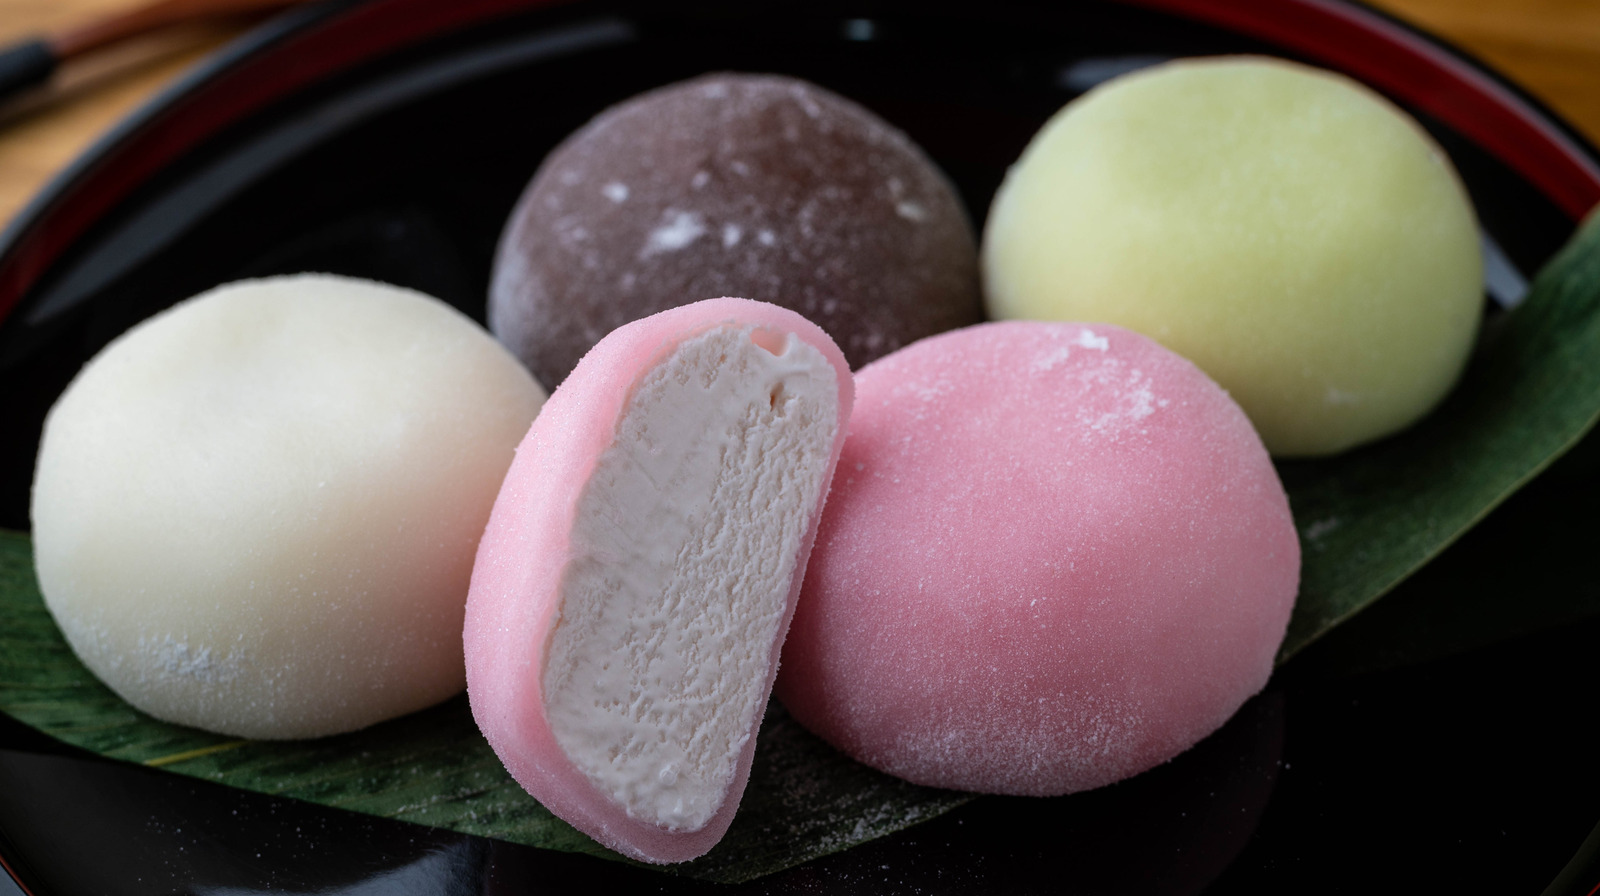 Mochi | Definition, Facts, Japan, New Year, & Rice Cakes | Britannica